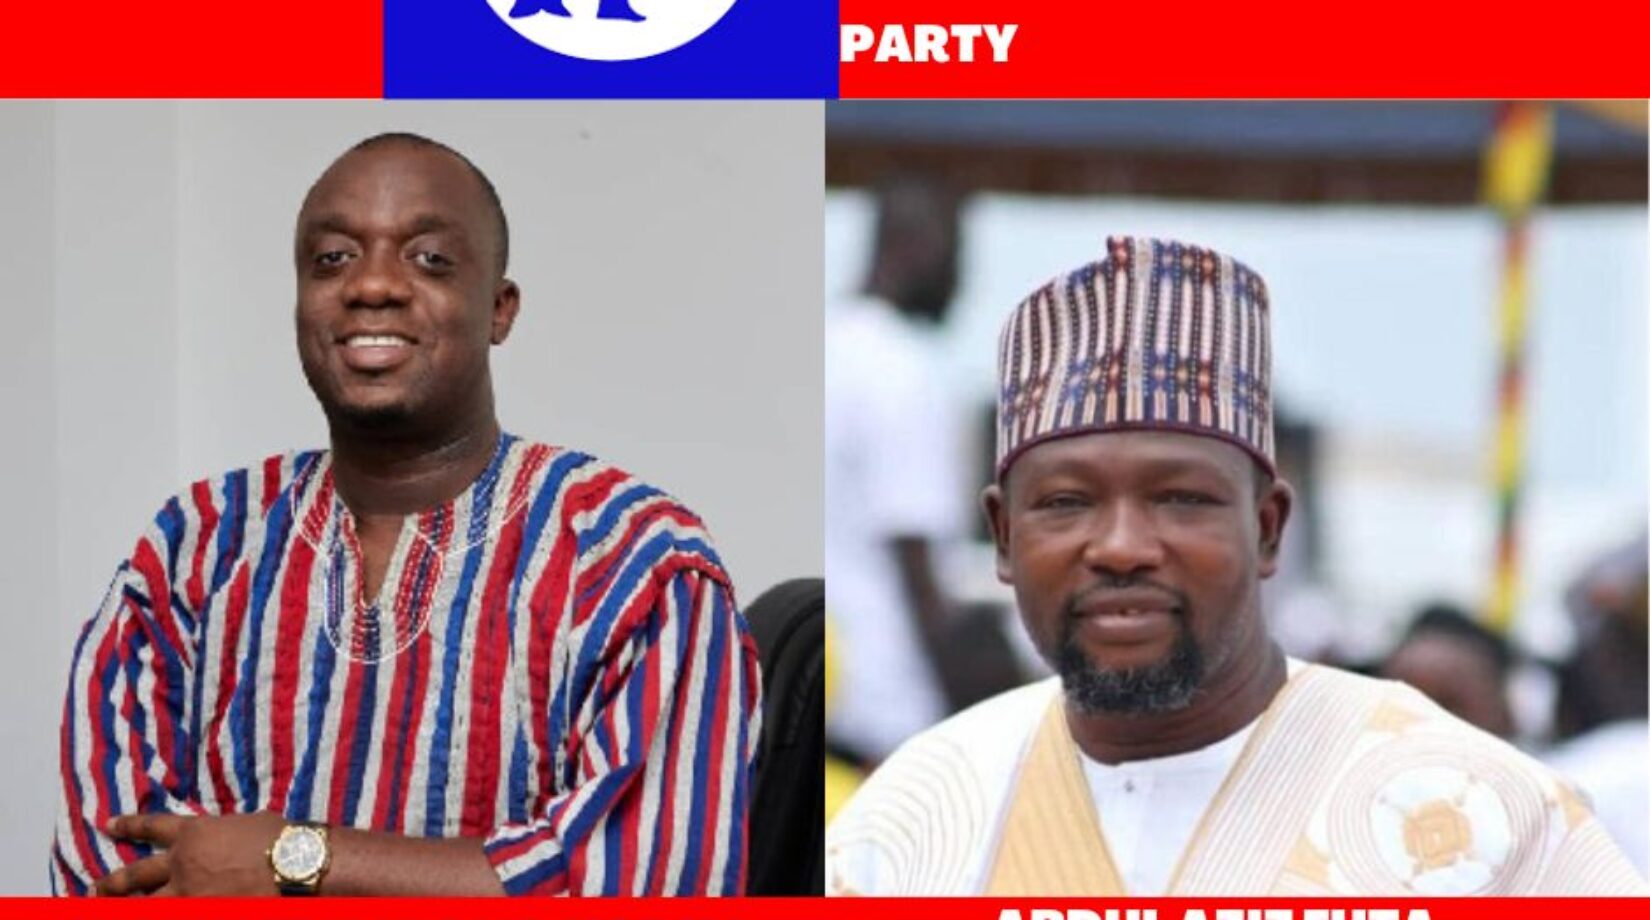 NPP 2024: MY HUMBLE ADVICE TO NPP DELEGATES ON THE BACK OF NATIONAL NASARA COORDINATOR’S FAILED “COUP